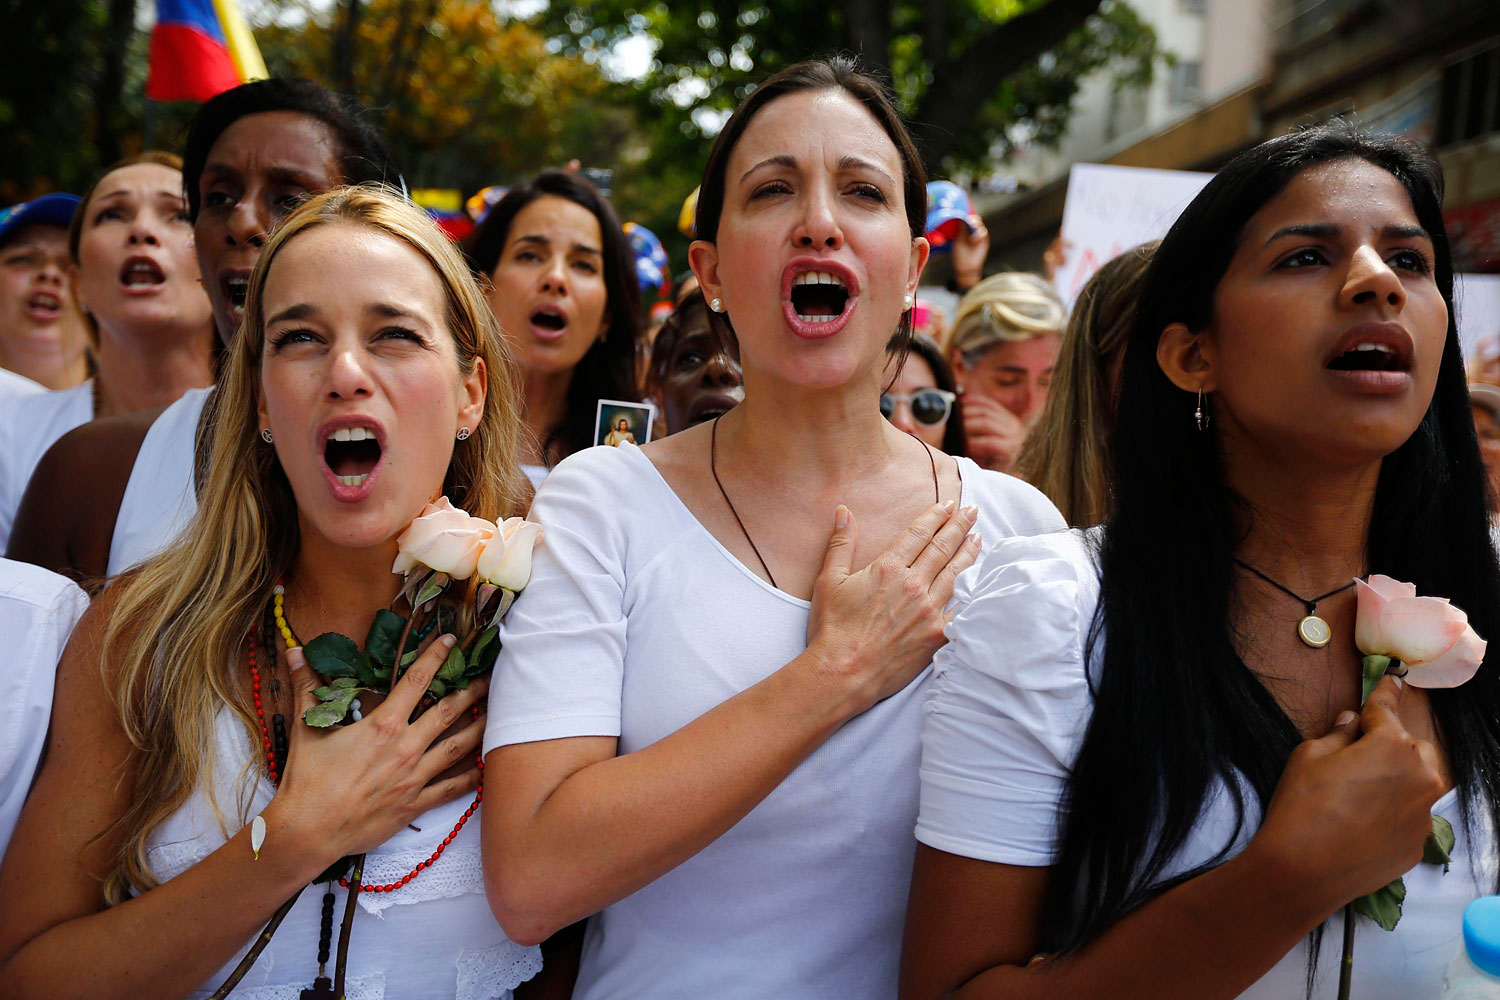 Lilian Tintori, wife of jailed opposition leader Leopoldo Lopez, and opposition deputy Maria Corina Machado take part in a women's rally against Nicolas Maduro's government in Caracas Feb. 26, 2014.